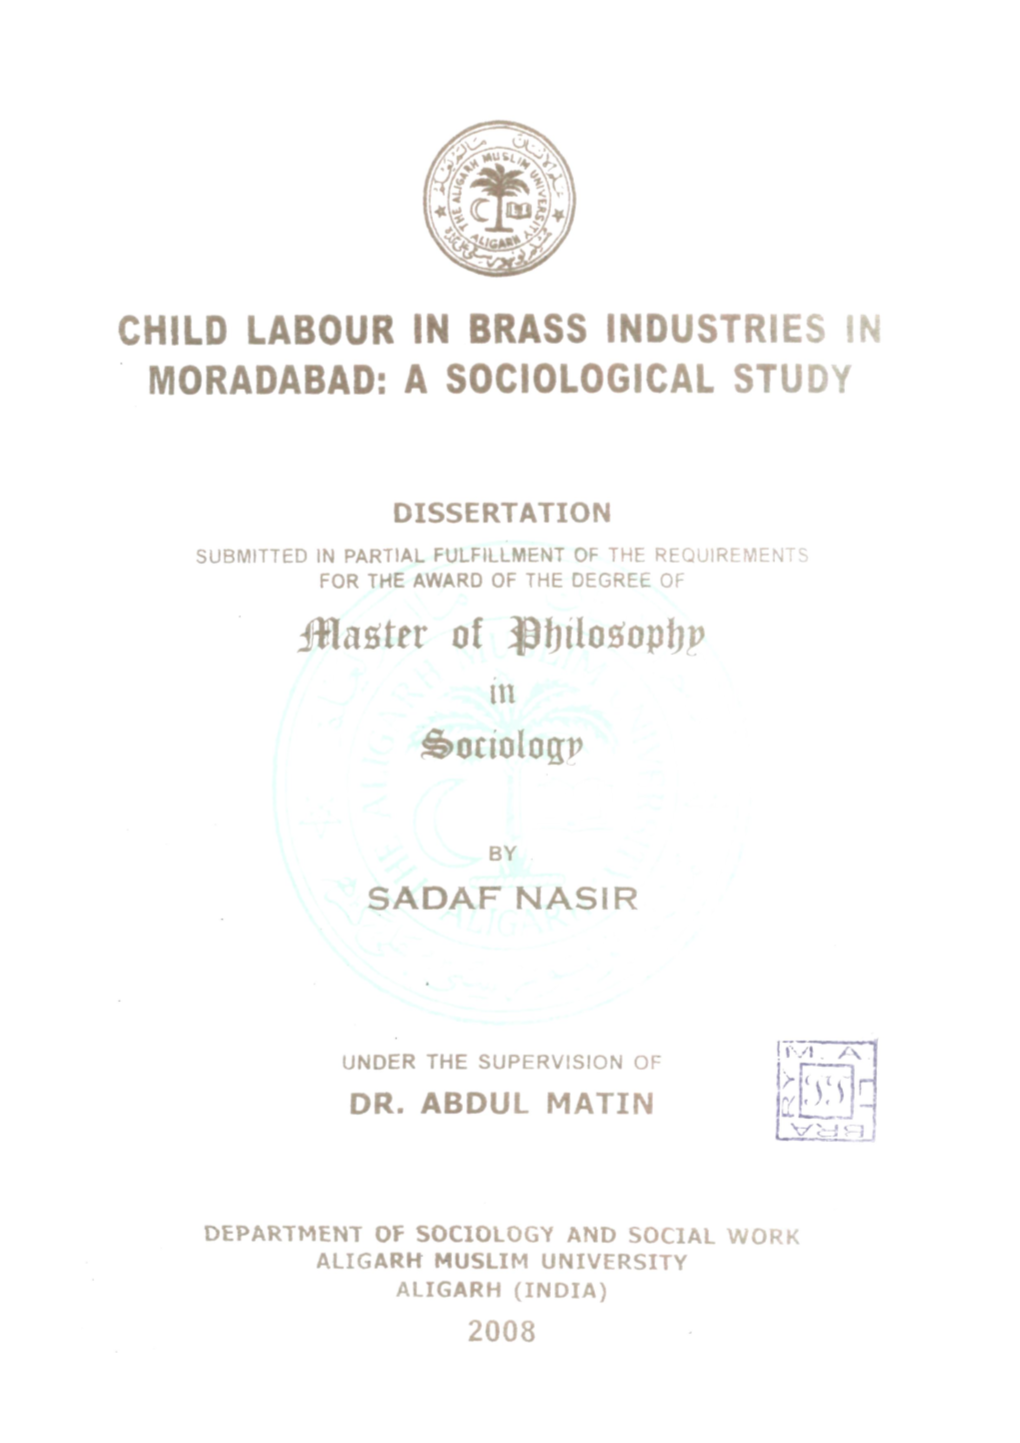 CHILD LABOUR in BRASS INDUSTRIES in MORADABAD: a SOCIOLOGICAL STUDY Iflafiter of ^Fjilofioptjp in J&Ociologp 'Xs R